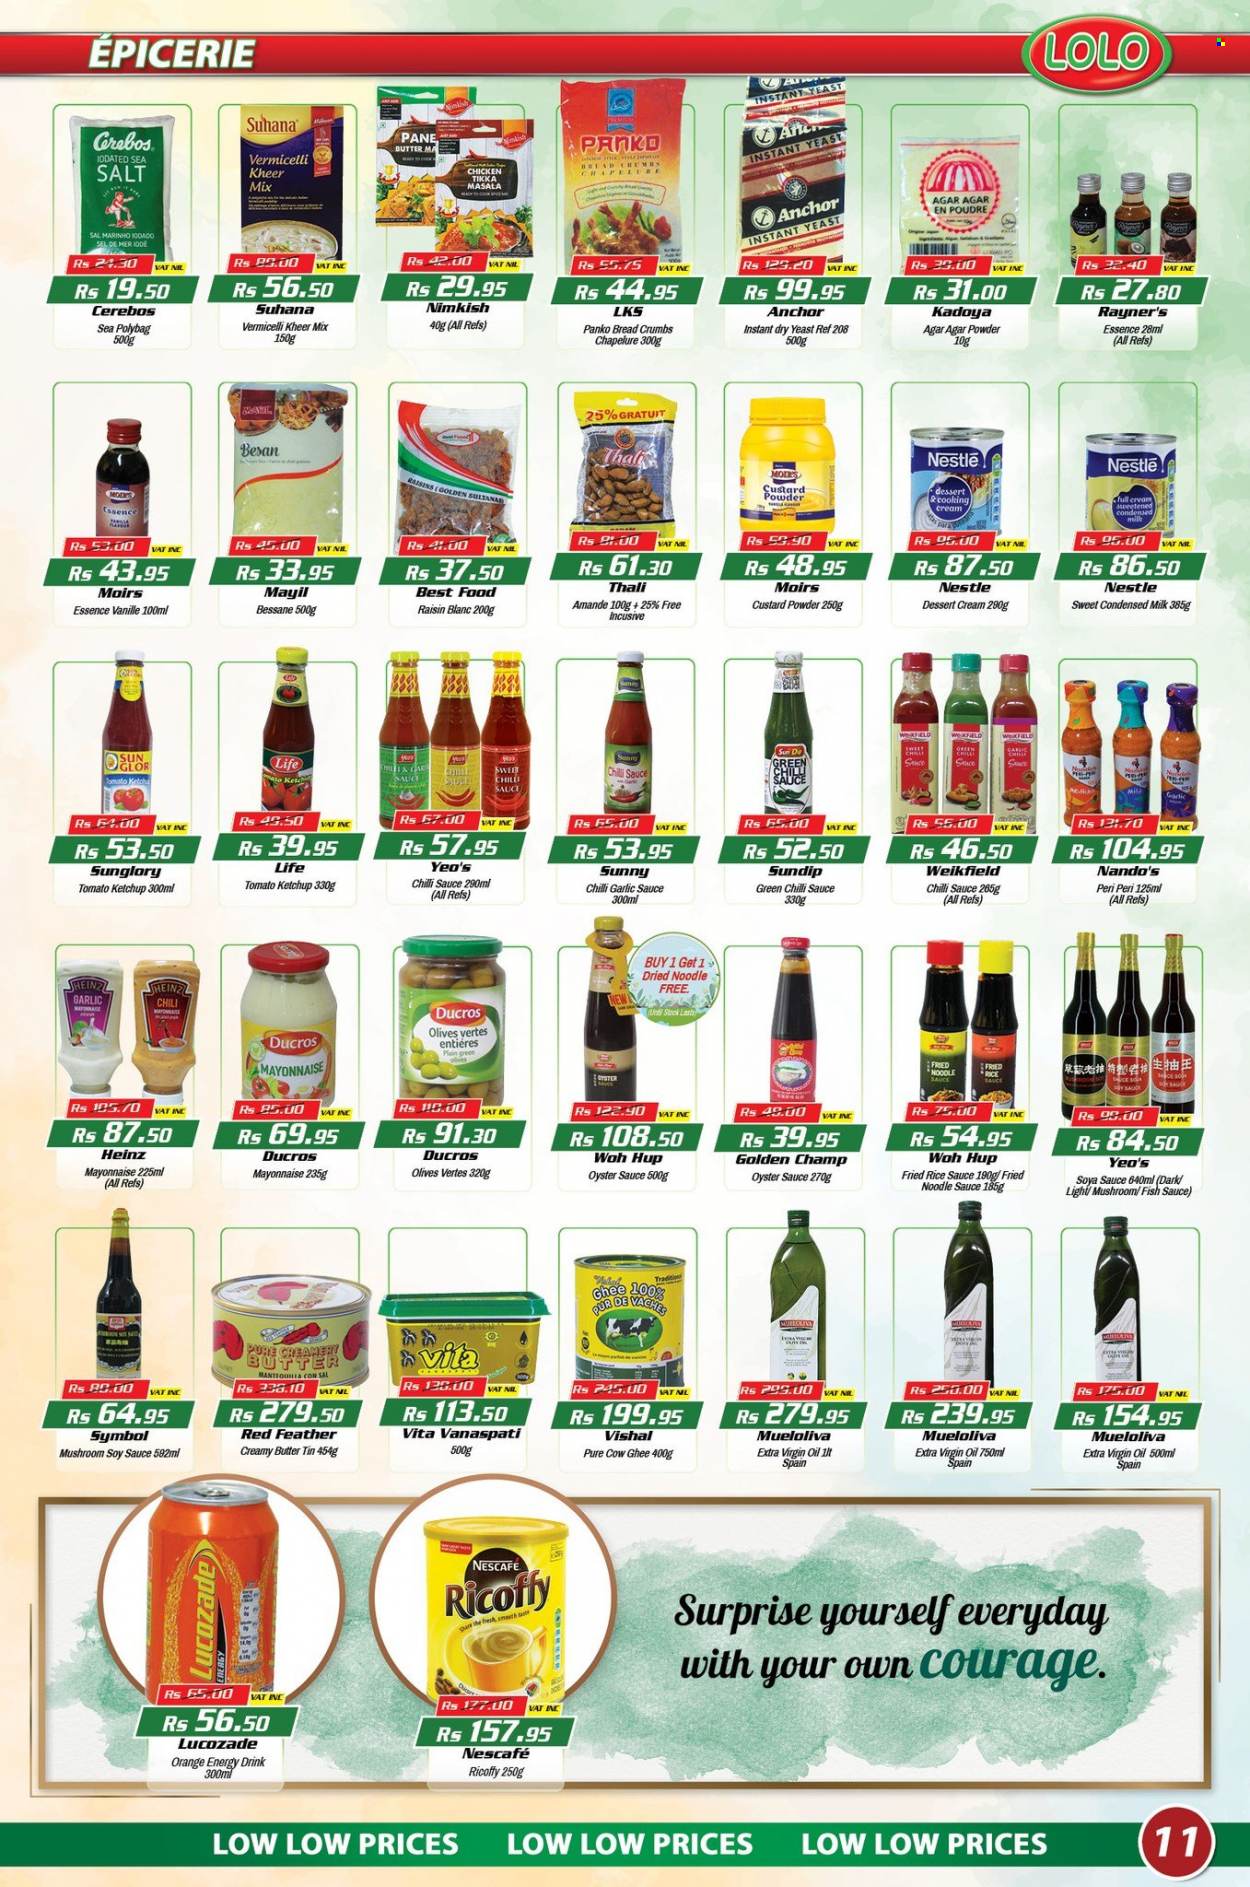 thumbnail - LOLO Hyper Catalogue - 26.03.2023 - 14.04.2023 - Sales products - mushrooms, breadcrumbs, panko breadcrumbs, oranges, oysters, fish, sauce, noodles, Tikka Masala, custard, condensed milk, yeast, butter, ghee, Anchor, mayonnaise, gram flour, sea salt, dry yeast, fish sauce, soy sauce, oyster sauce, chilli sauce, sweet chilli sauce, garlic sauce, extra virgin olive oil, oil, raisins, sultanas, dried fruit, energy drink, Lucozade, Ricoffy, chicken, Nestlé, Heinz, ketchup, olives, Nescafé. Page 11.